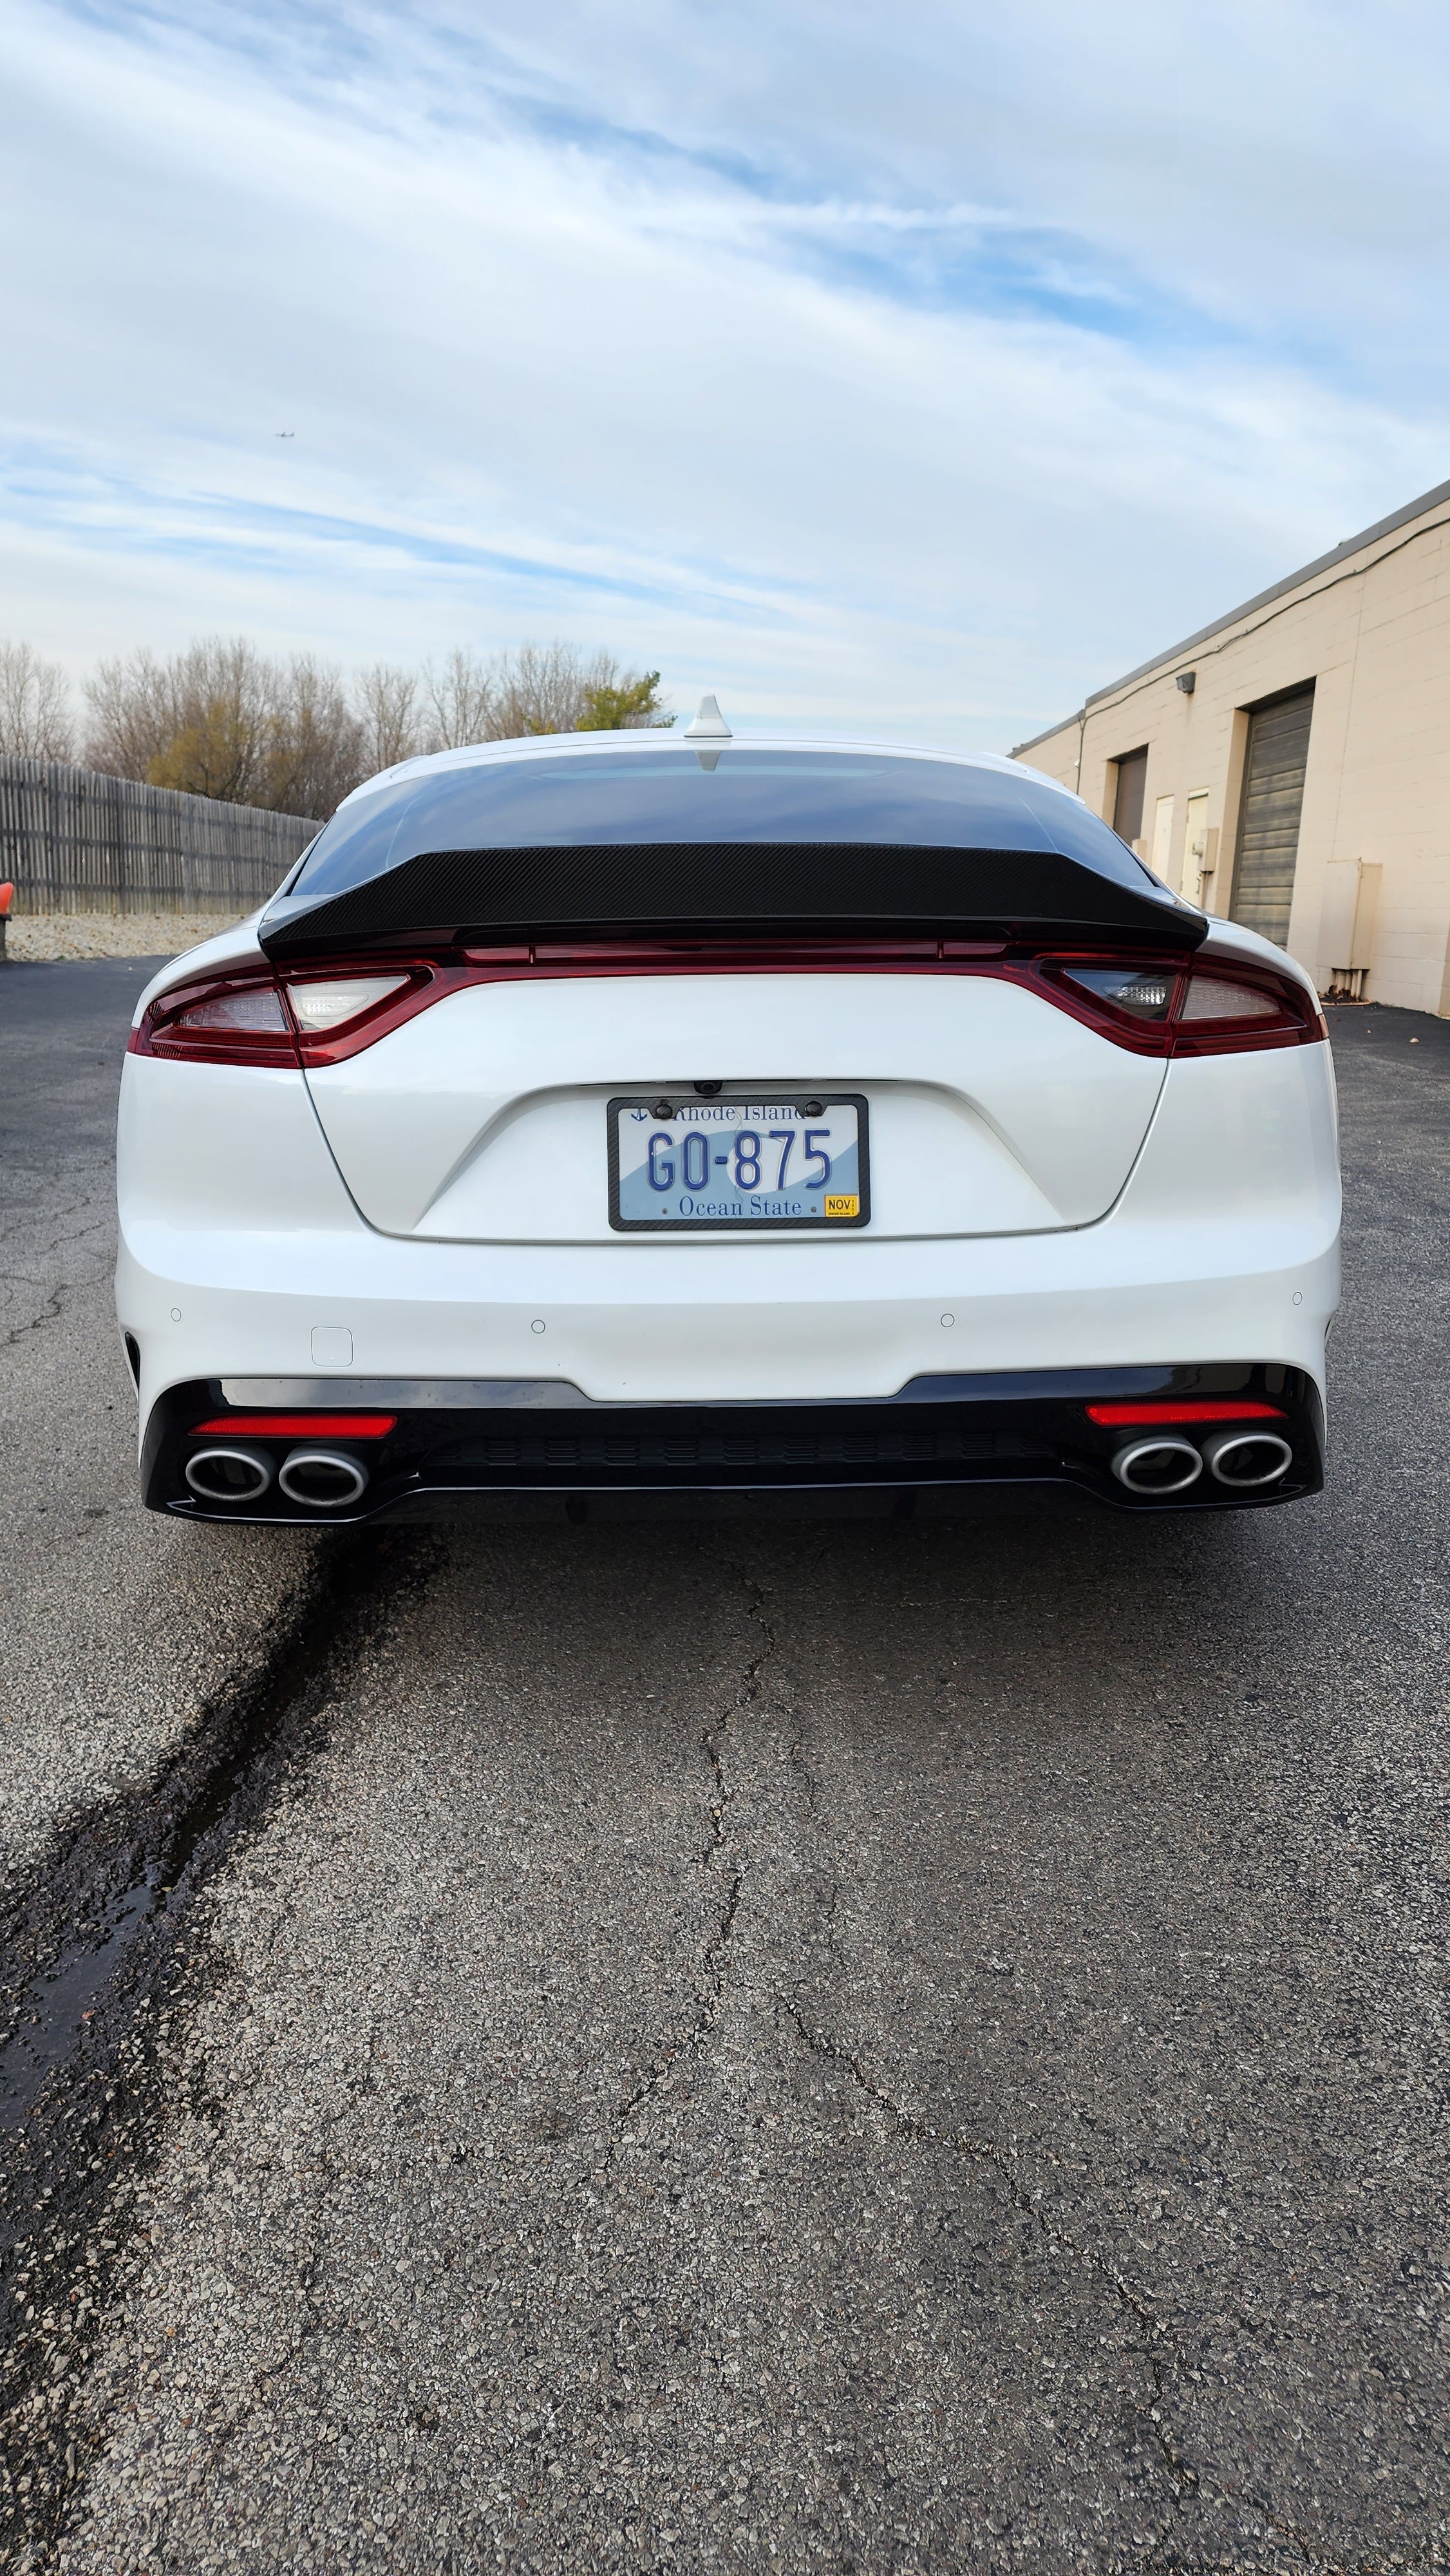 Rear angle perspective of the Kia Stinger with Jalisco's Carbon Half Trunk Spoiler, focusing on the spoiler's impact on the vehicle's rear aesthetic and its aerodynamic design